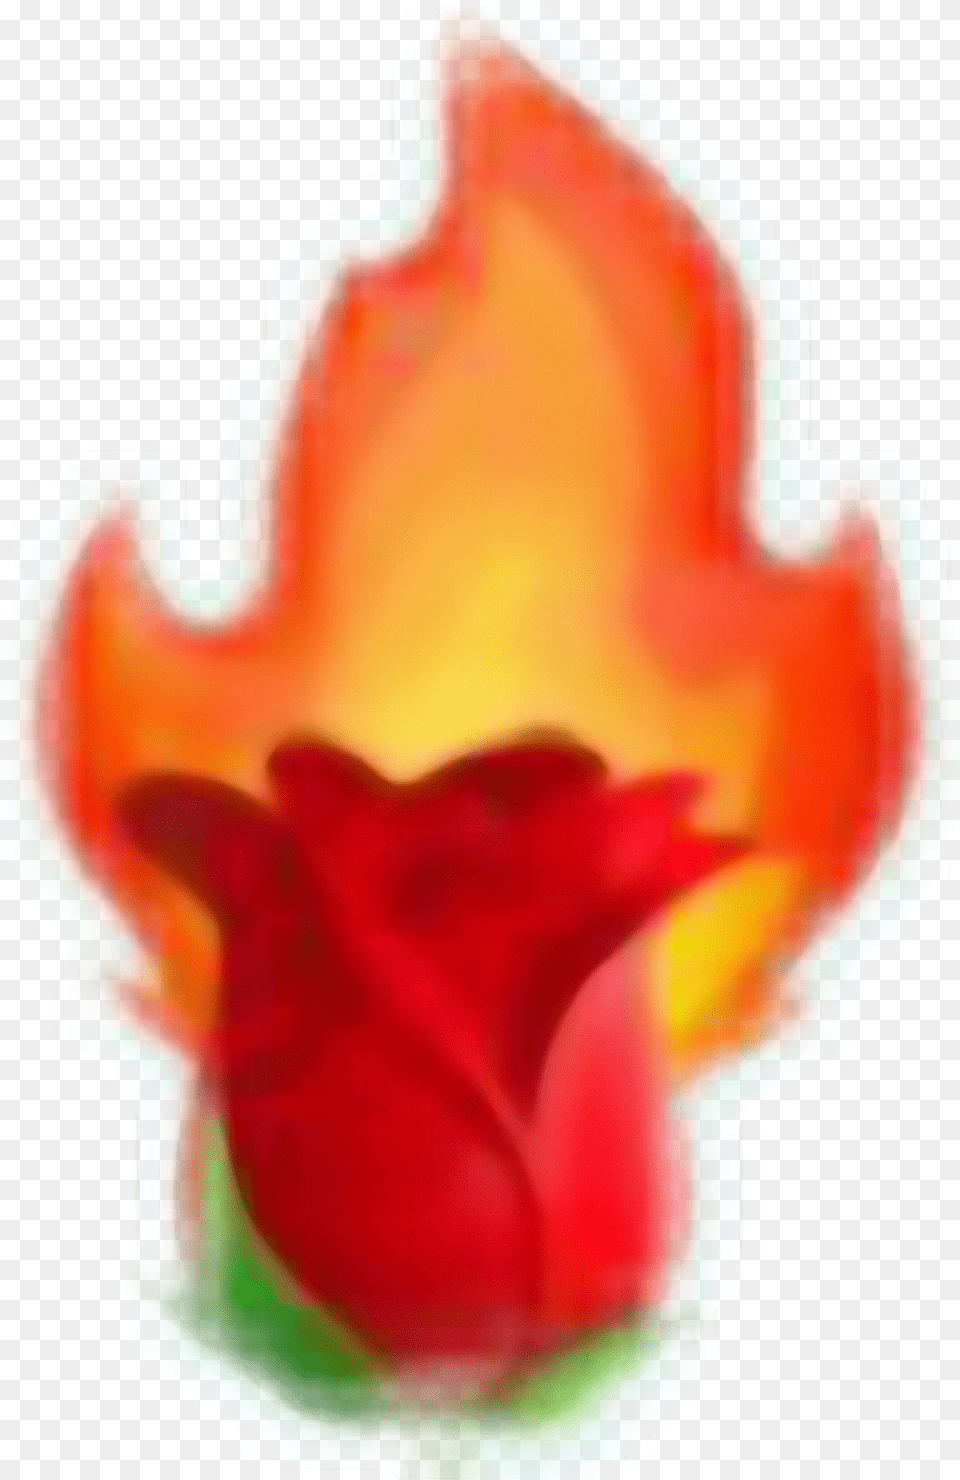 Rose Fire Tumblr Aesthetic Aestheticred Red Emojis Tulip, Flower, Petal, Plant, Leaf Png